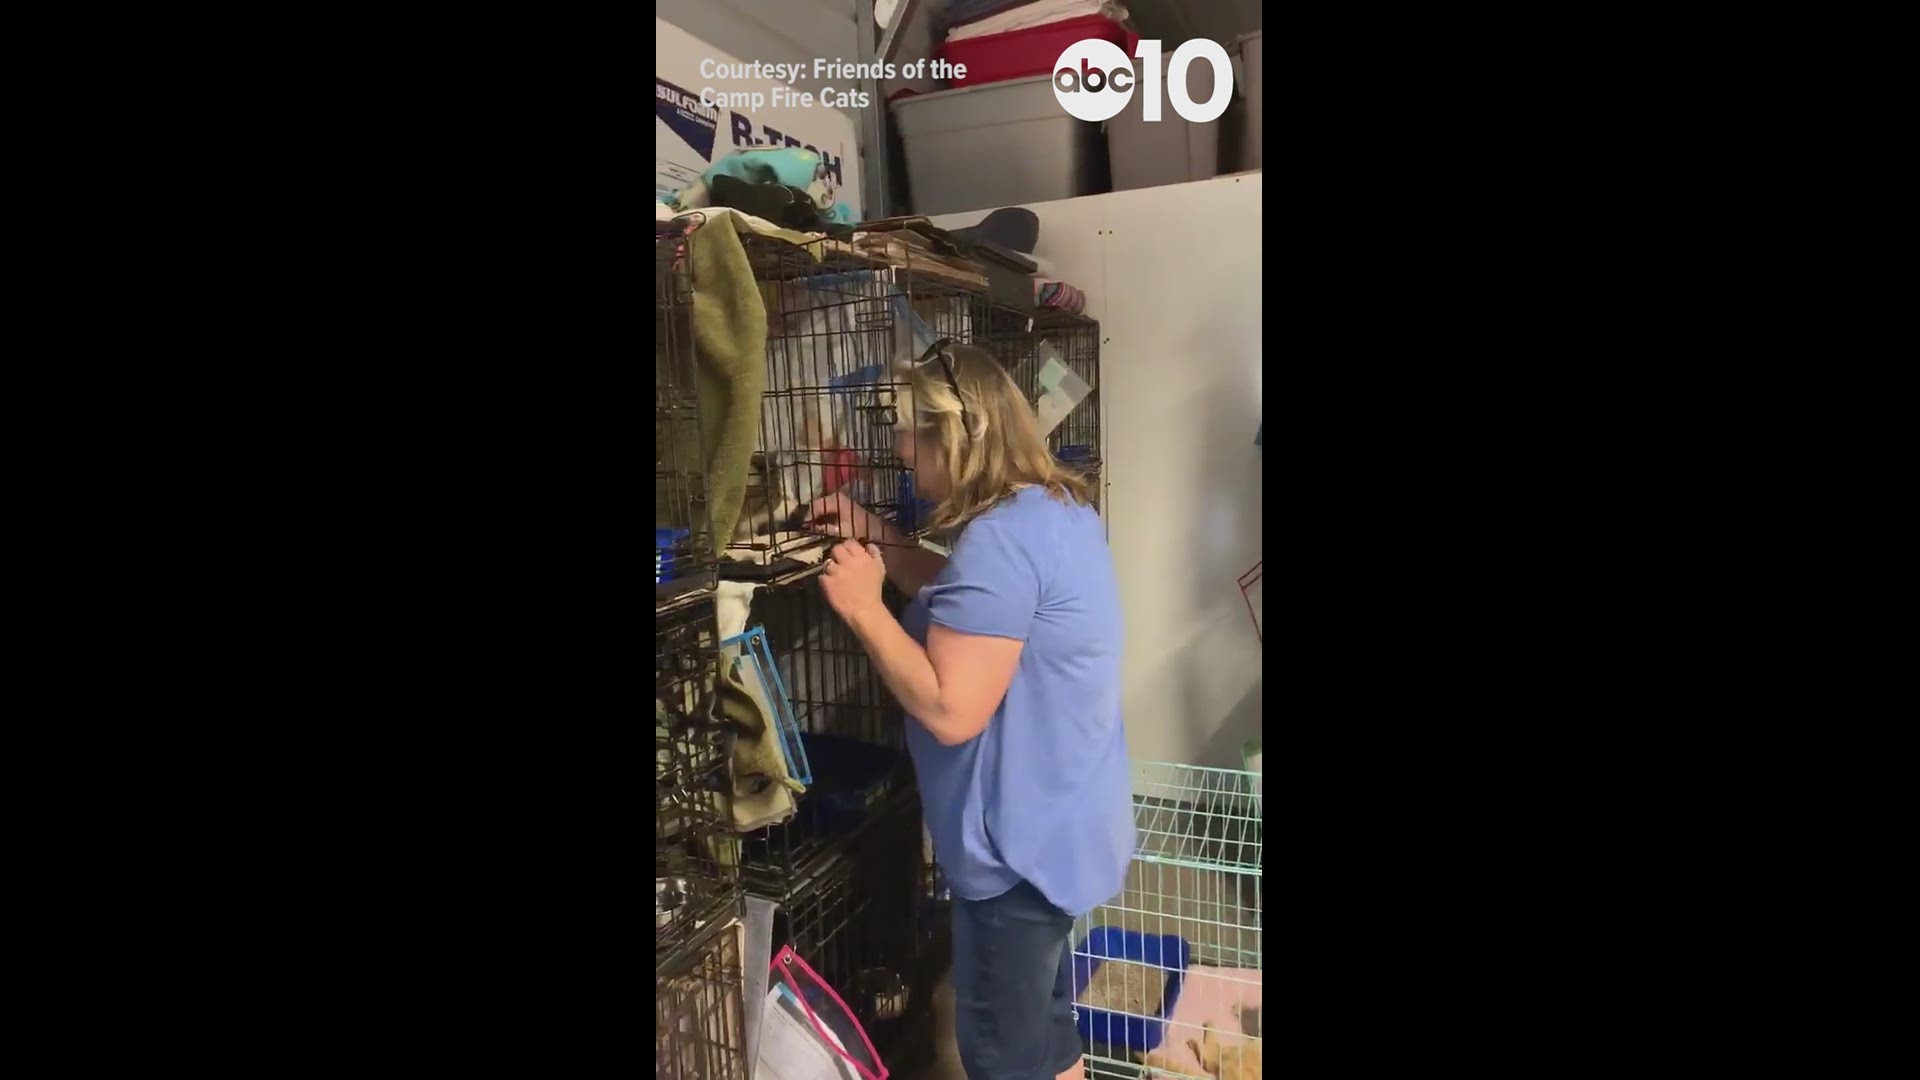 Julie Walker was reunited with her cat, Jellybean, thanks to Friends of the Camp Fire Cats.